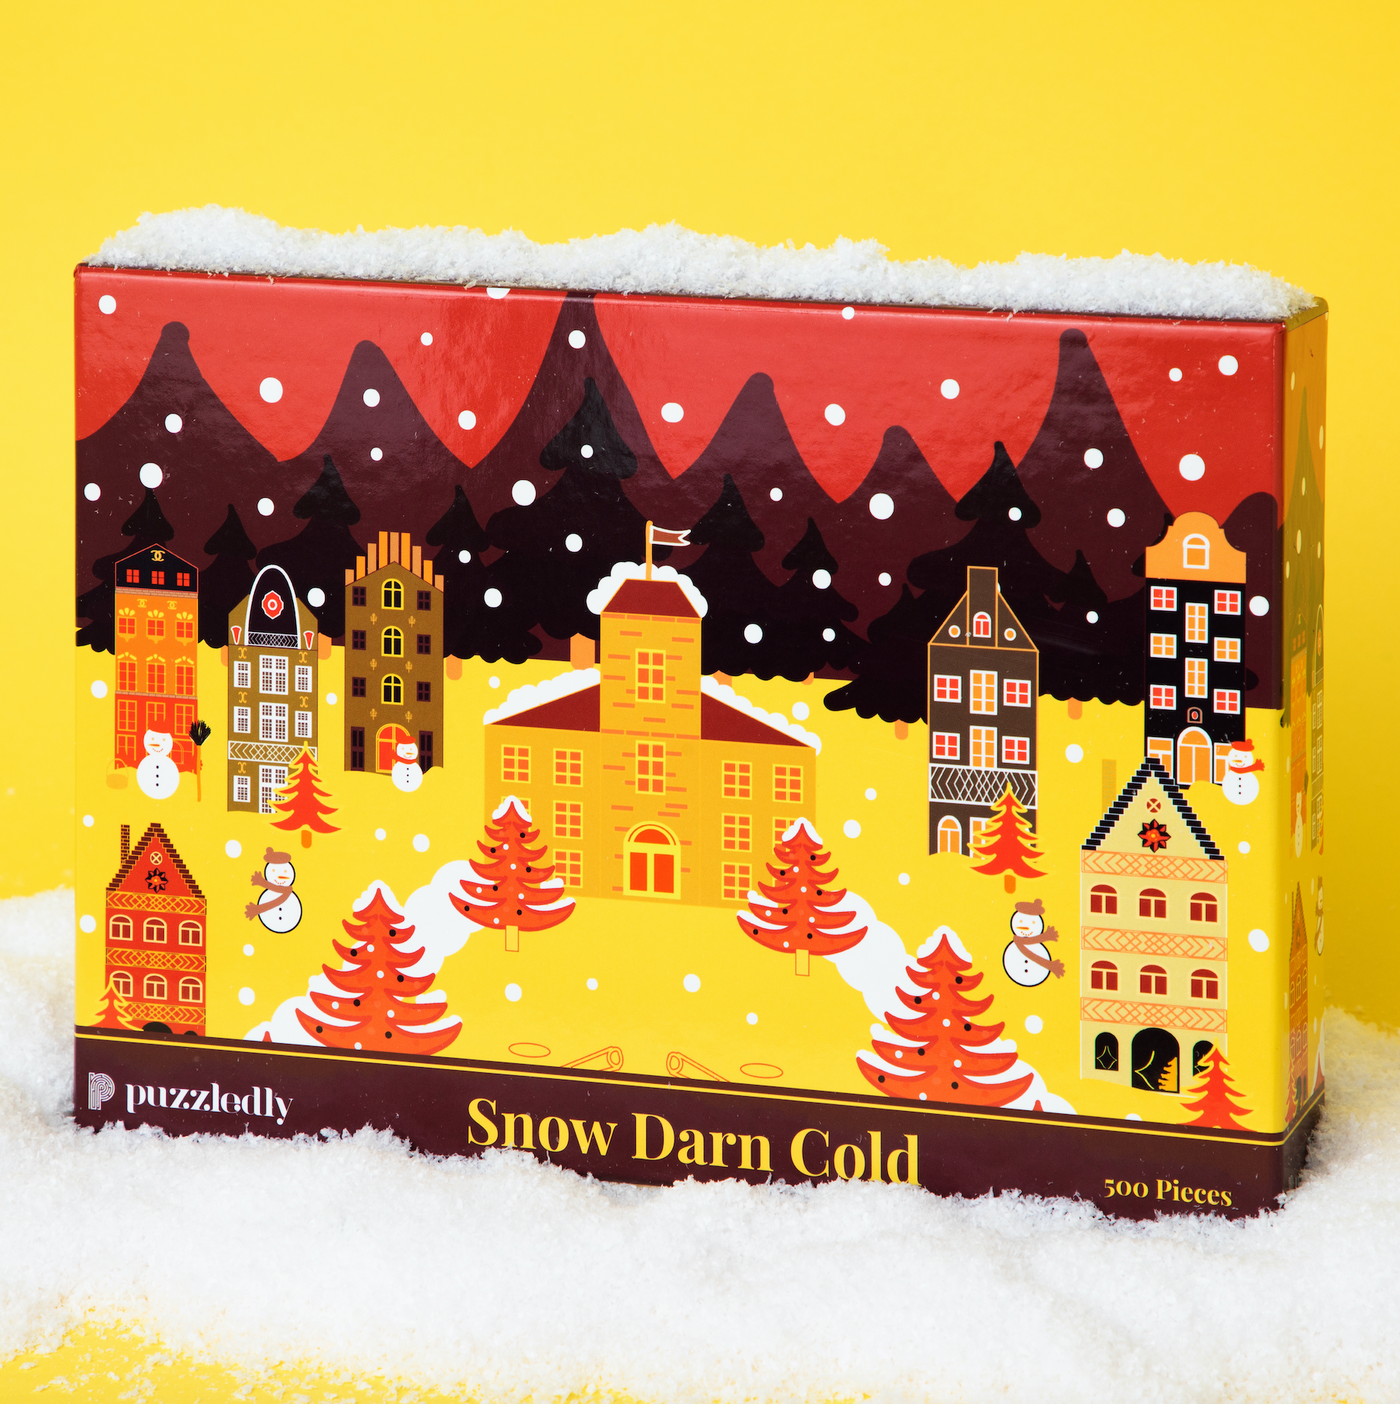 Snow Darn Cold | 500 Piece Jigsaw Puzzle Puzzledly Puzzledly.